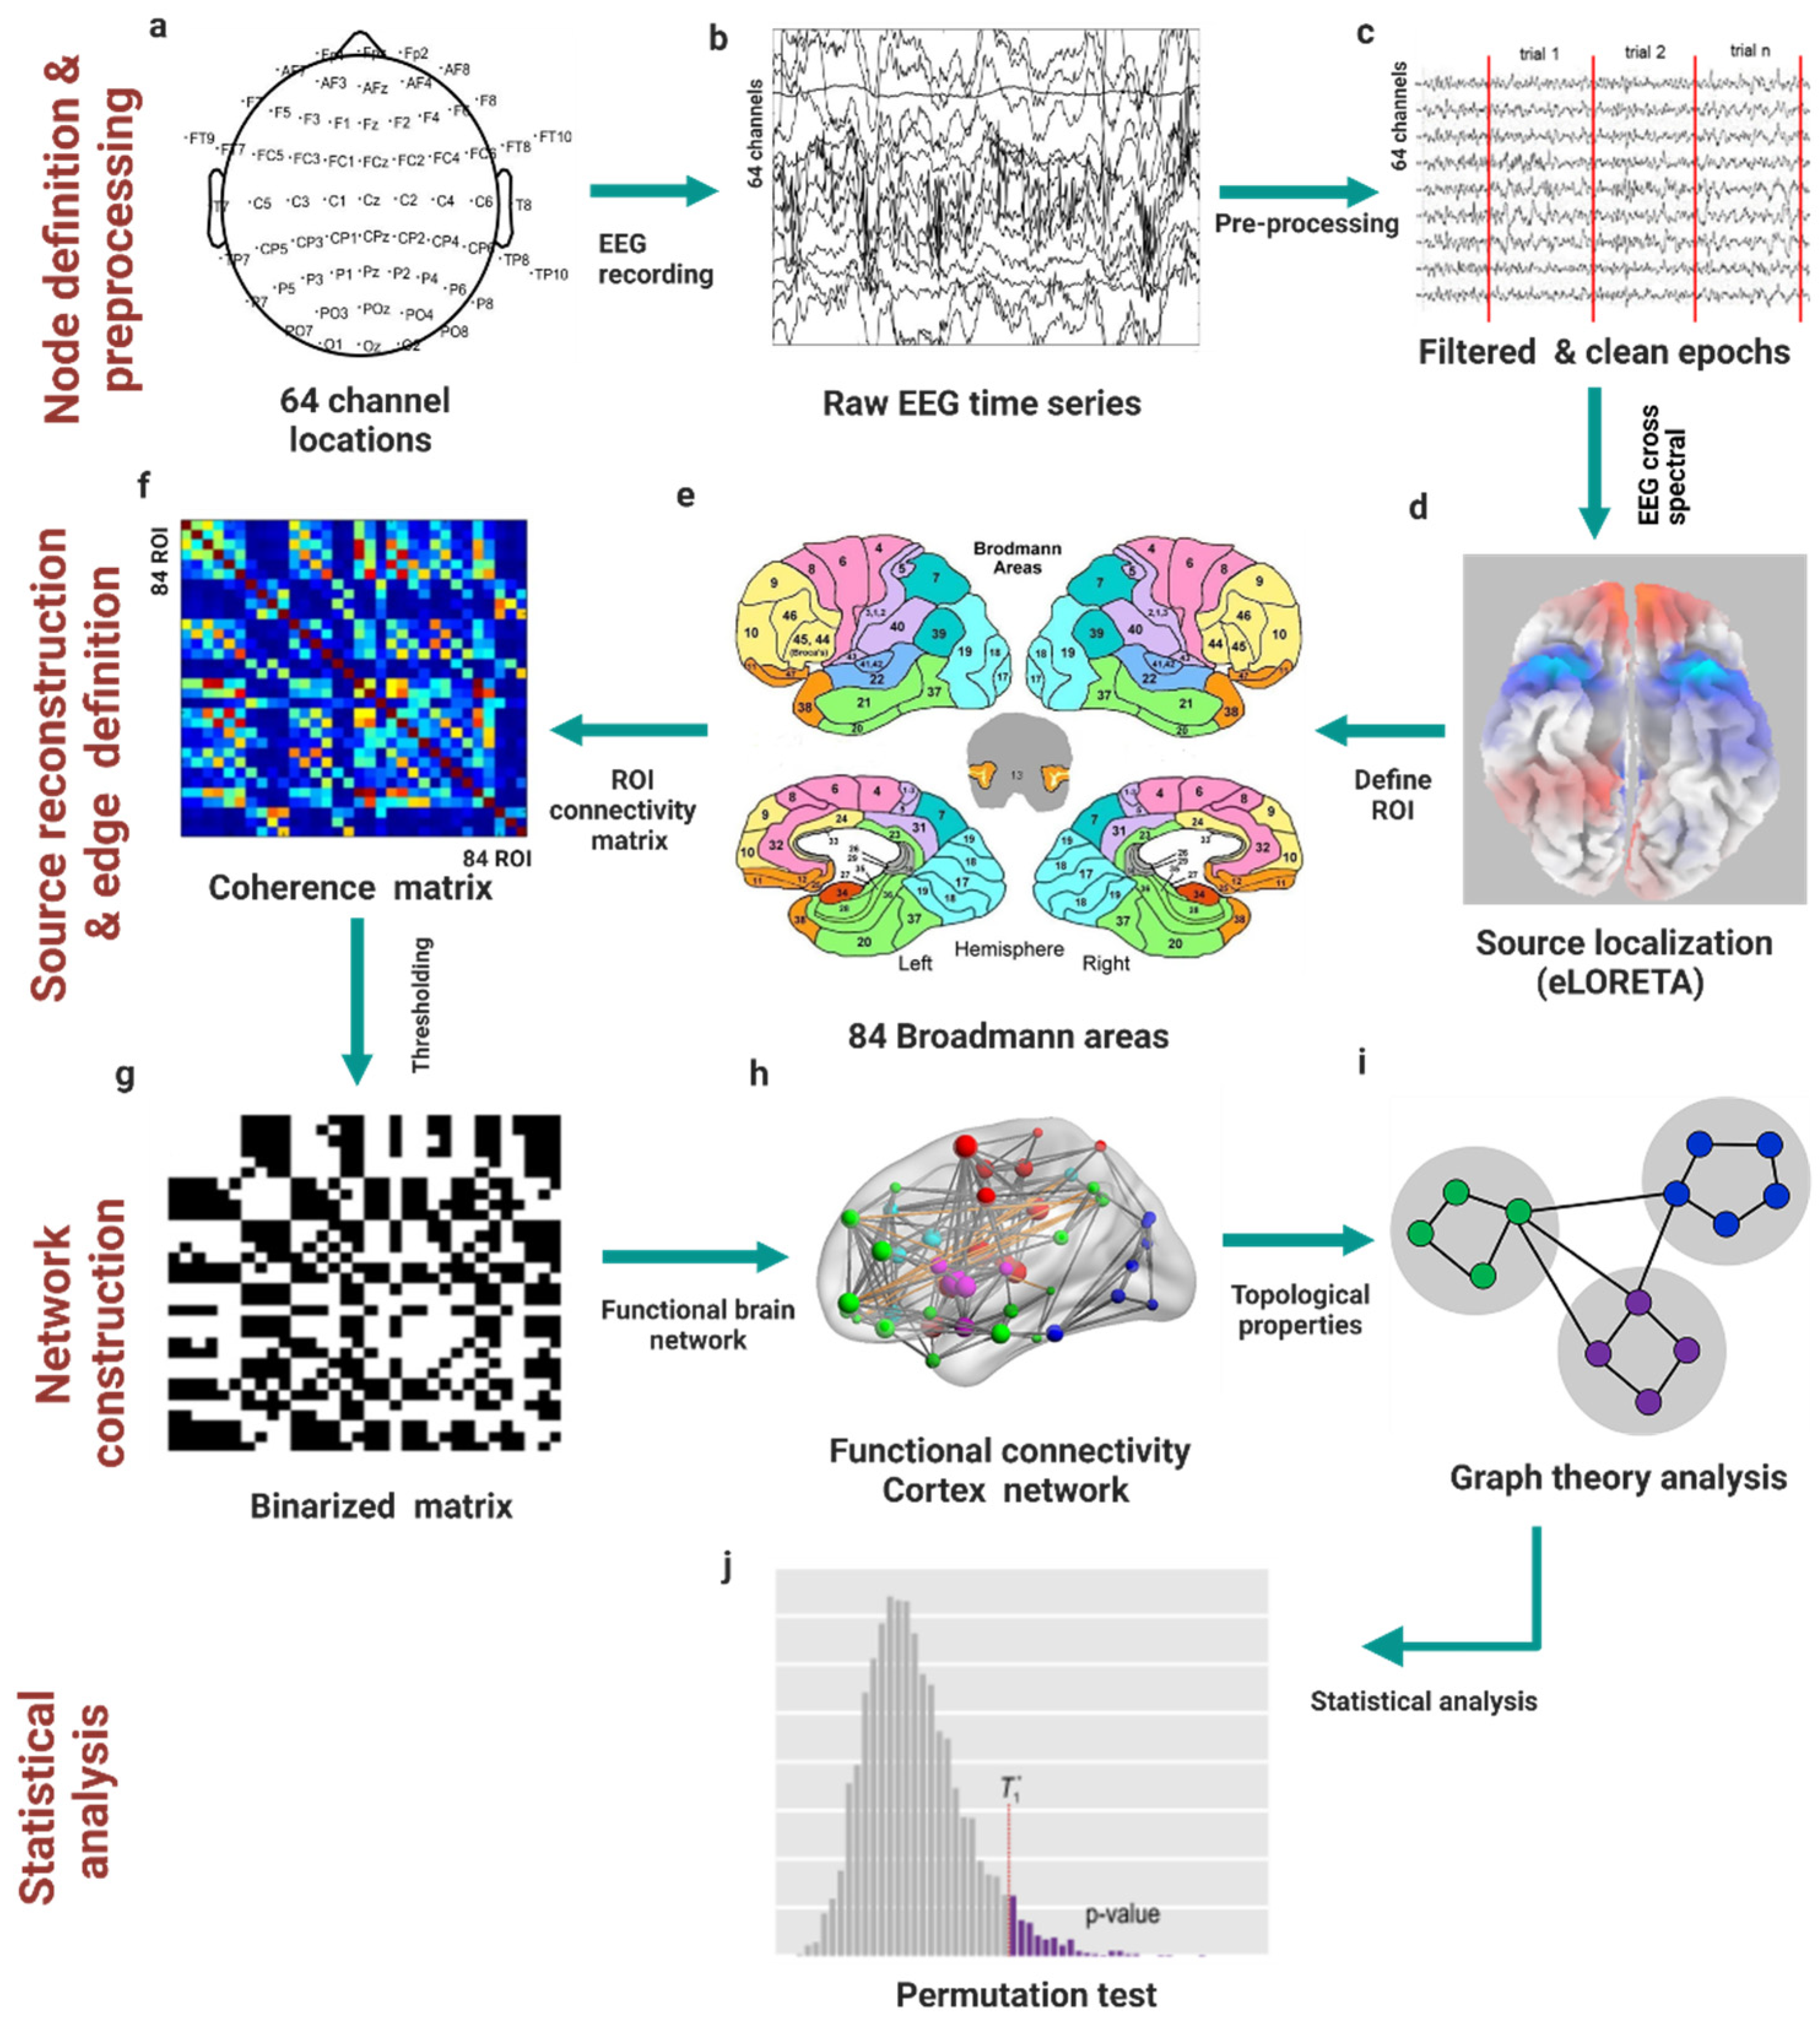 PDF) Diurnal oscillations of MRI metrics in the brains of male participants